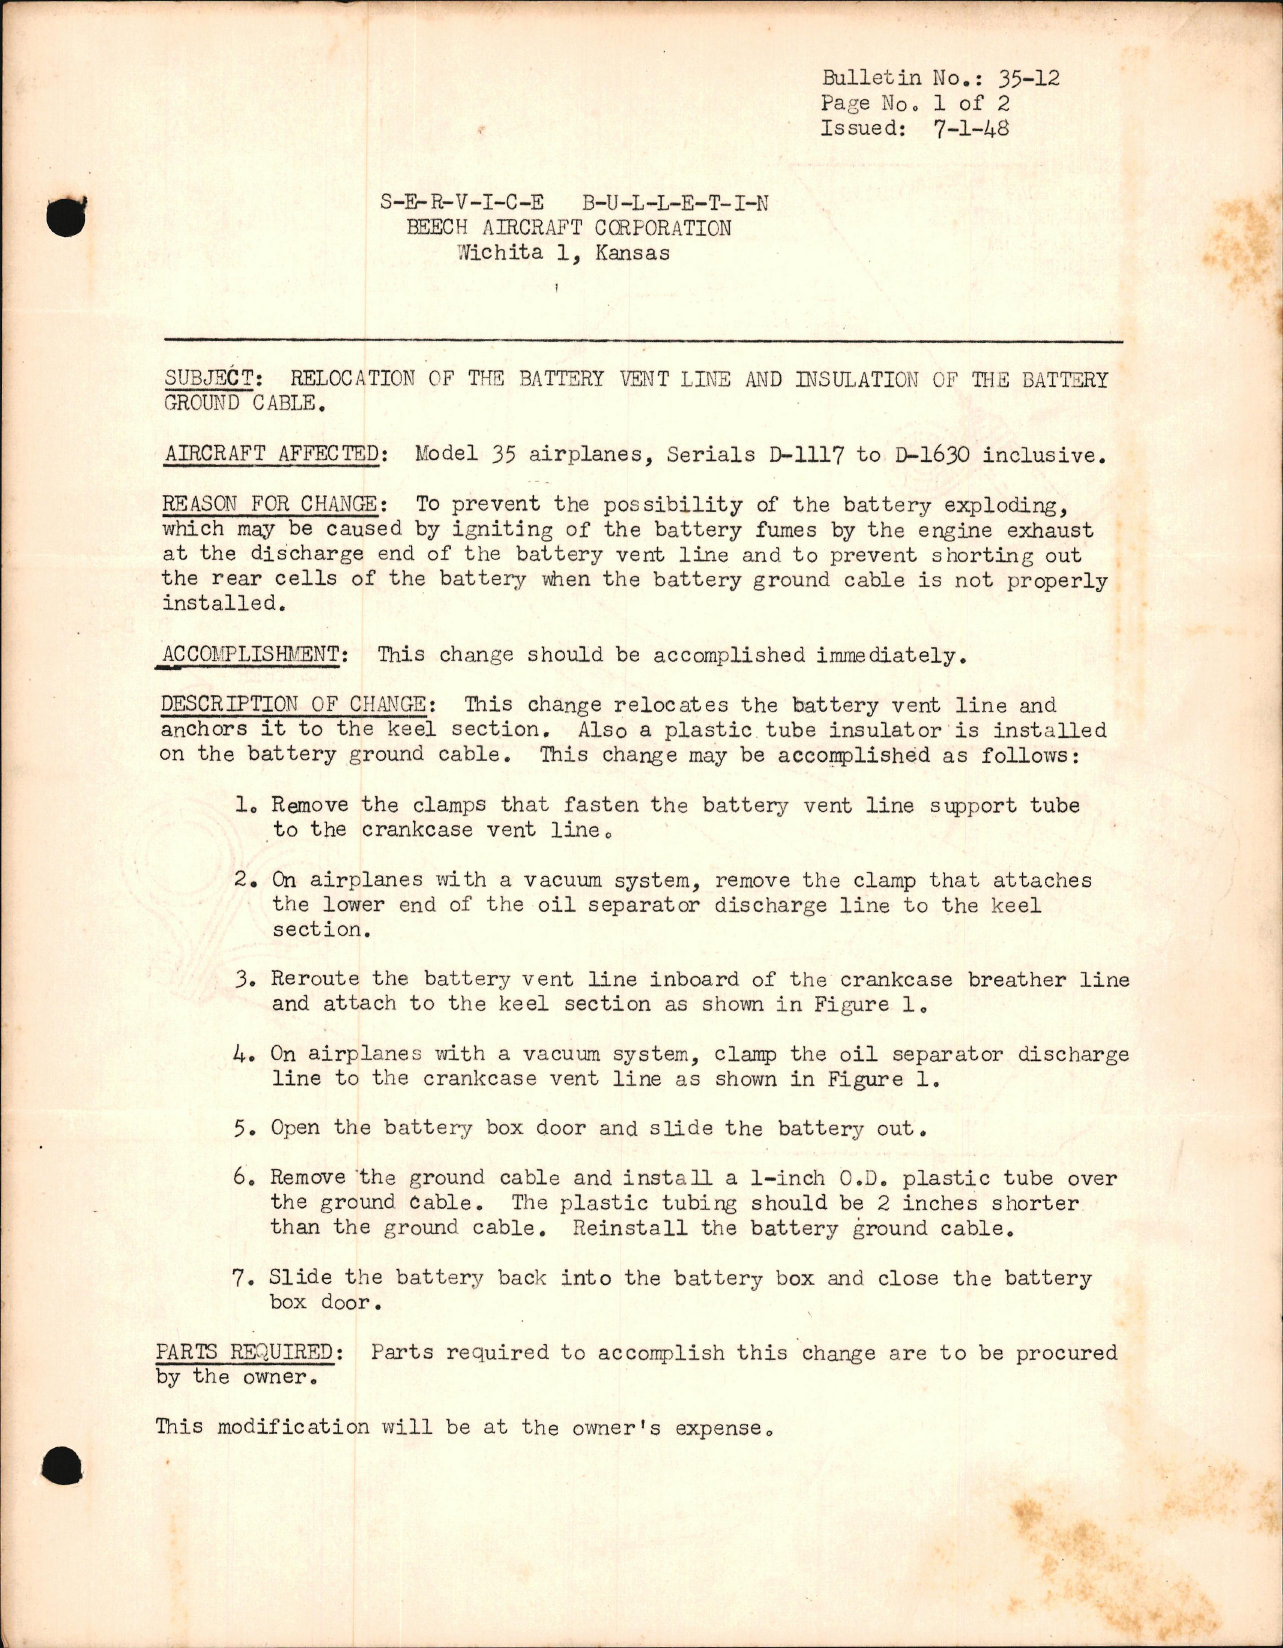 Sample page 1 from AirCorps Library document: Relocation of the Battery Vent Line and Insulation of the Battery Ground Cable